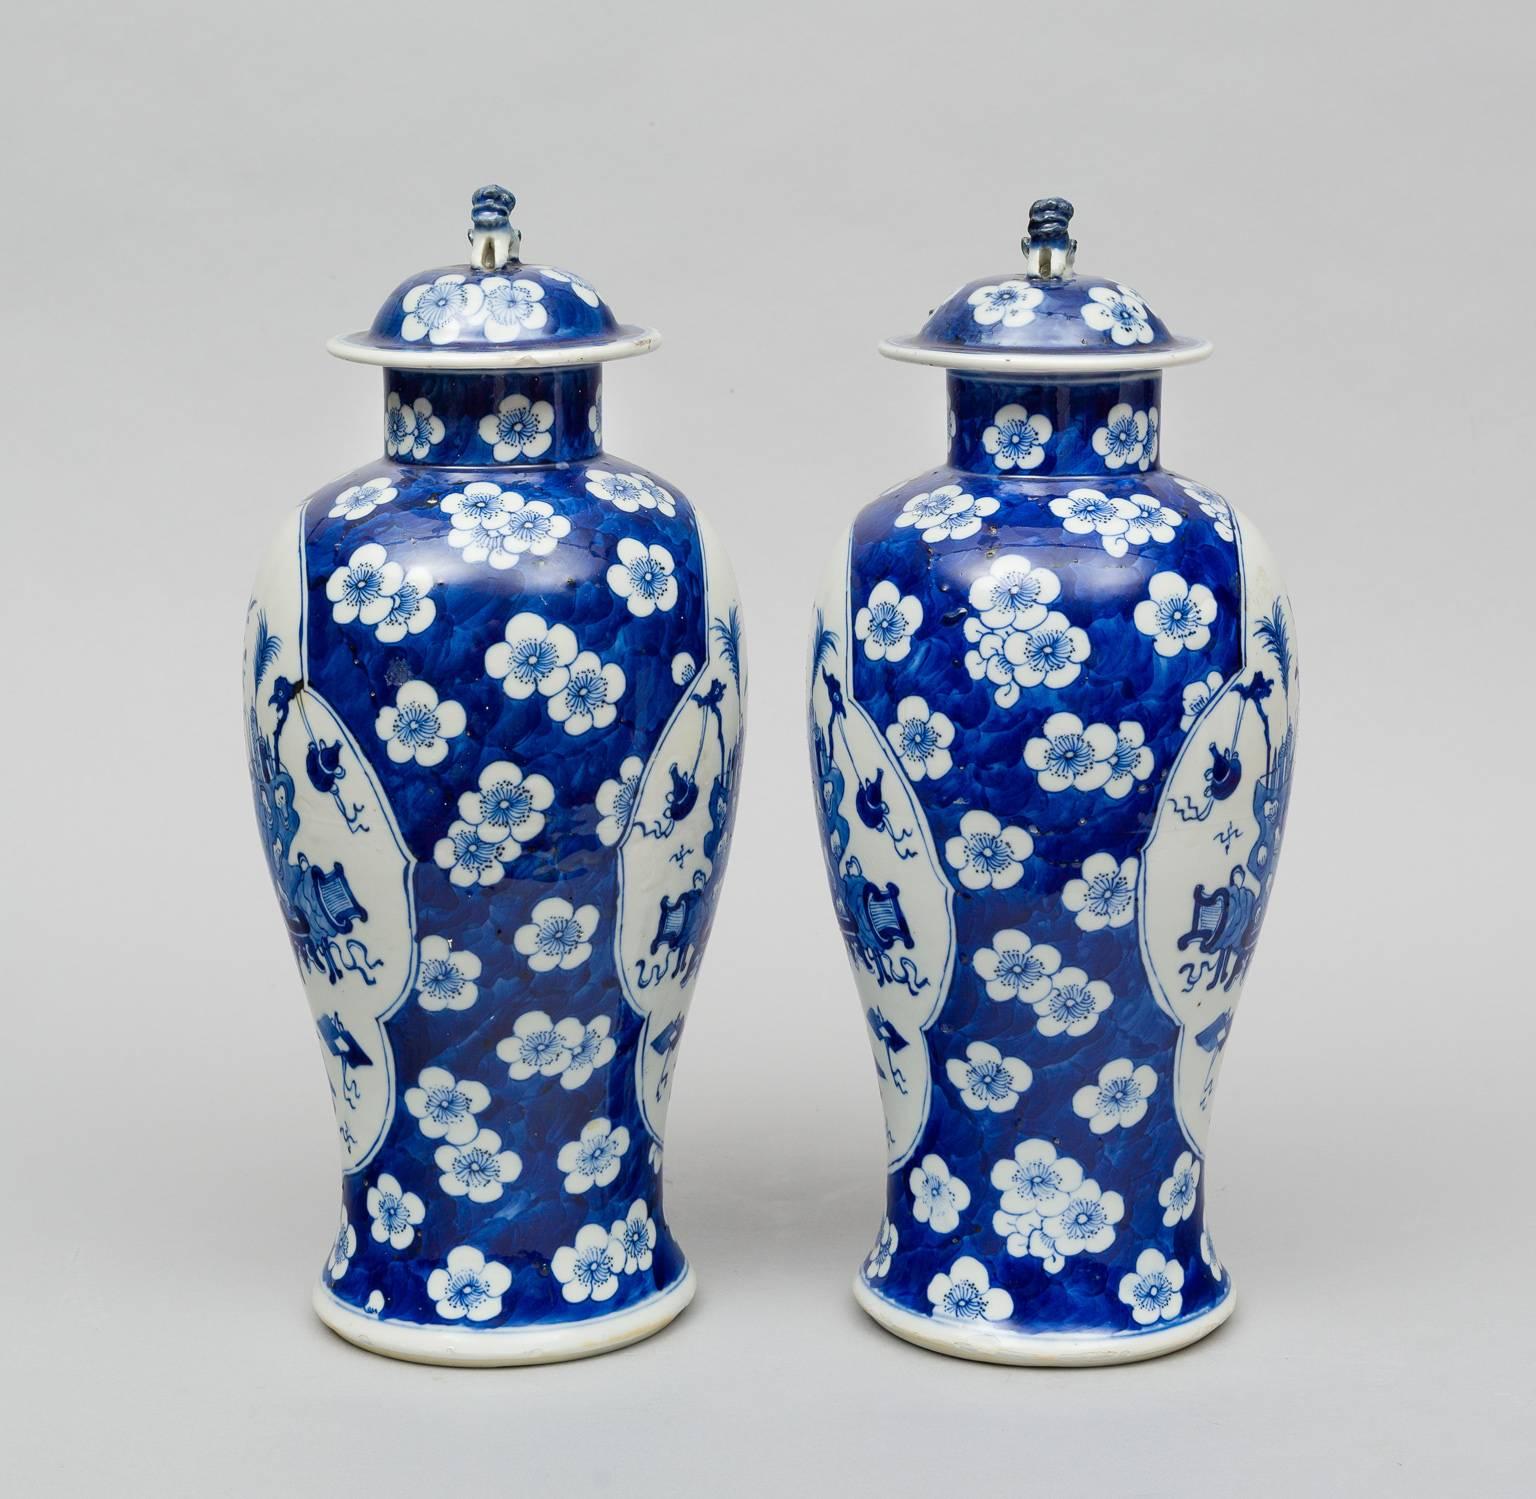 Pair of Chinese porcelain blue and white baluster-shaped vases with lids decorated with two shield shapes enclosing containers on a low table, a large vase holding flowers, another vase holding rolls of paper, on a background of Hawthorn flowers on